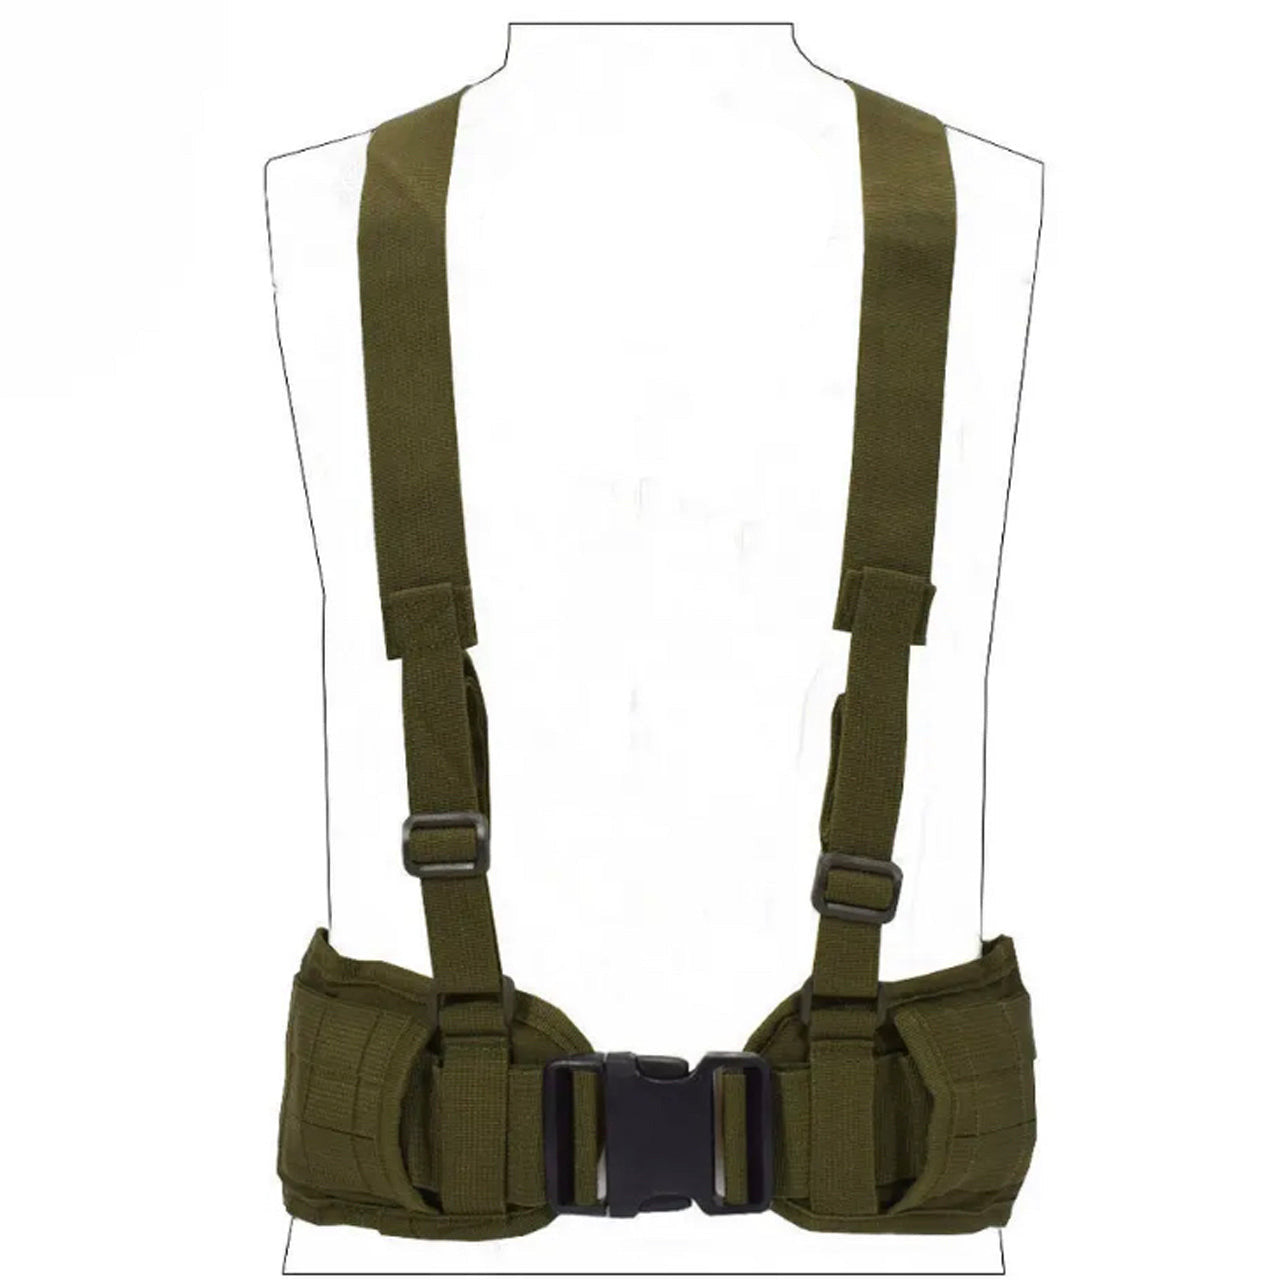 Boasting three rows of MOLLE-designed webbing straps for easy pouch attachment, the Cross Harness Platform is a lightweight, low-profile option with adjustable waist straps (34-64 inches) and easy-release, high-quality buckles. www.defenceqstore.com.au colour OD green